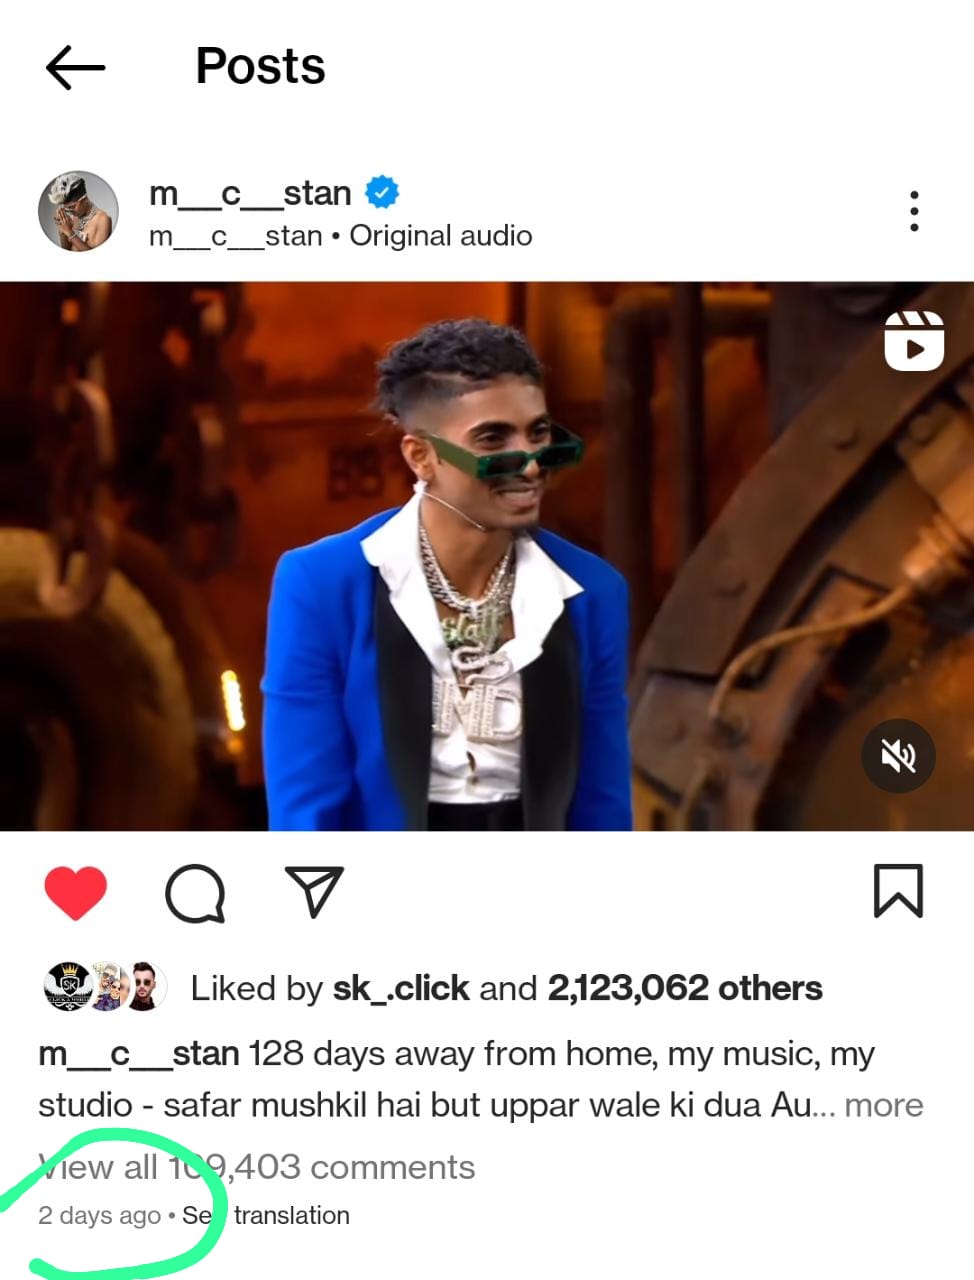 MC Stan gets 11 million views on his Reel in 48 hours ahead of the finale, breaking the record of all contestants in history of bigg boss